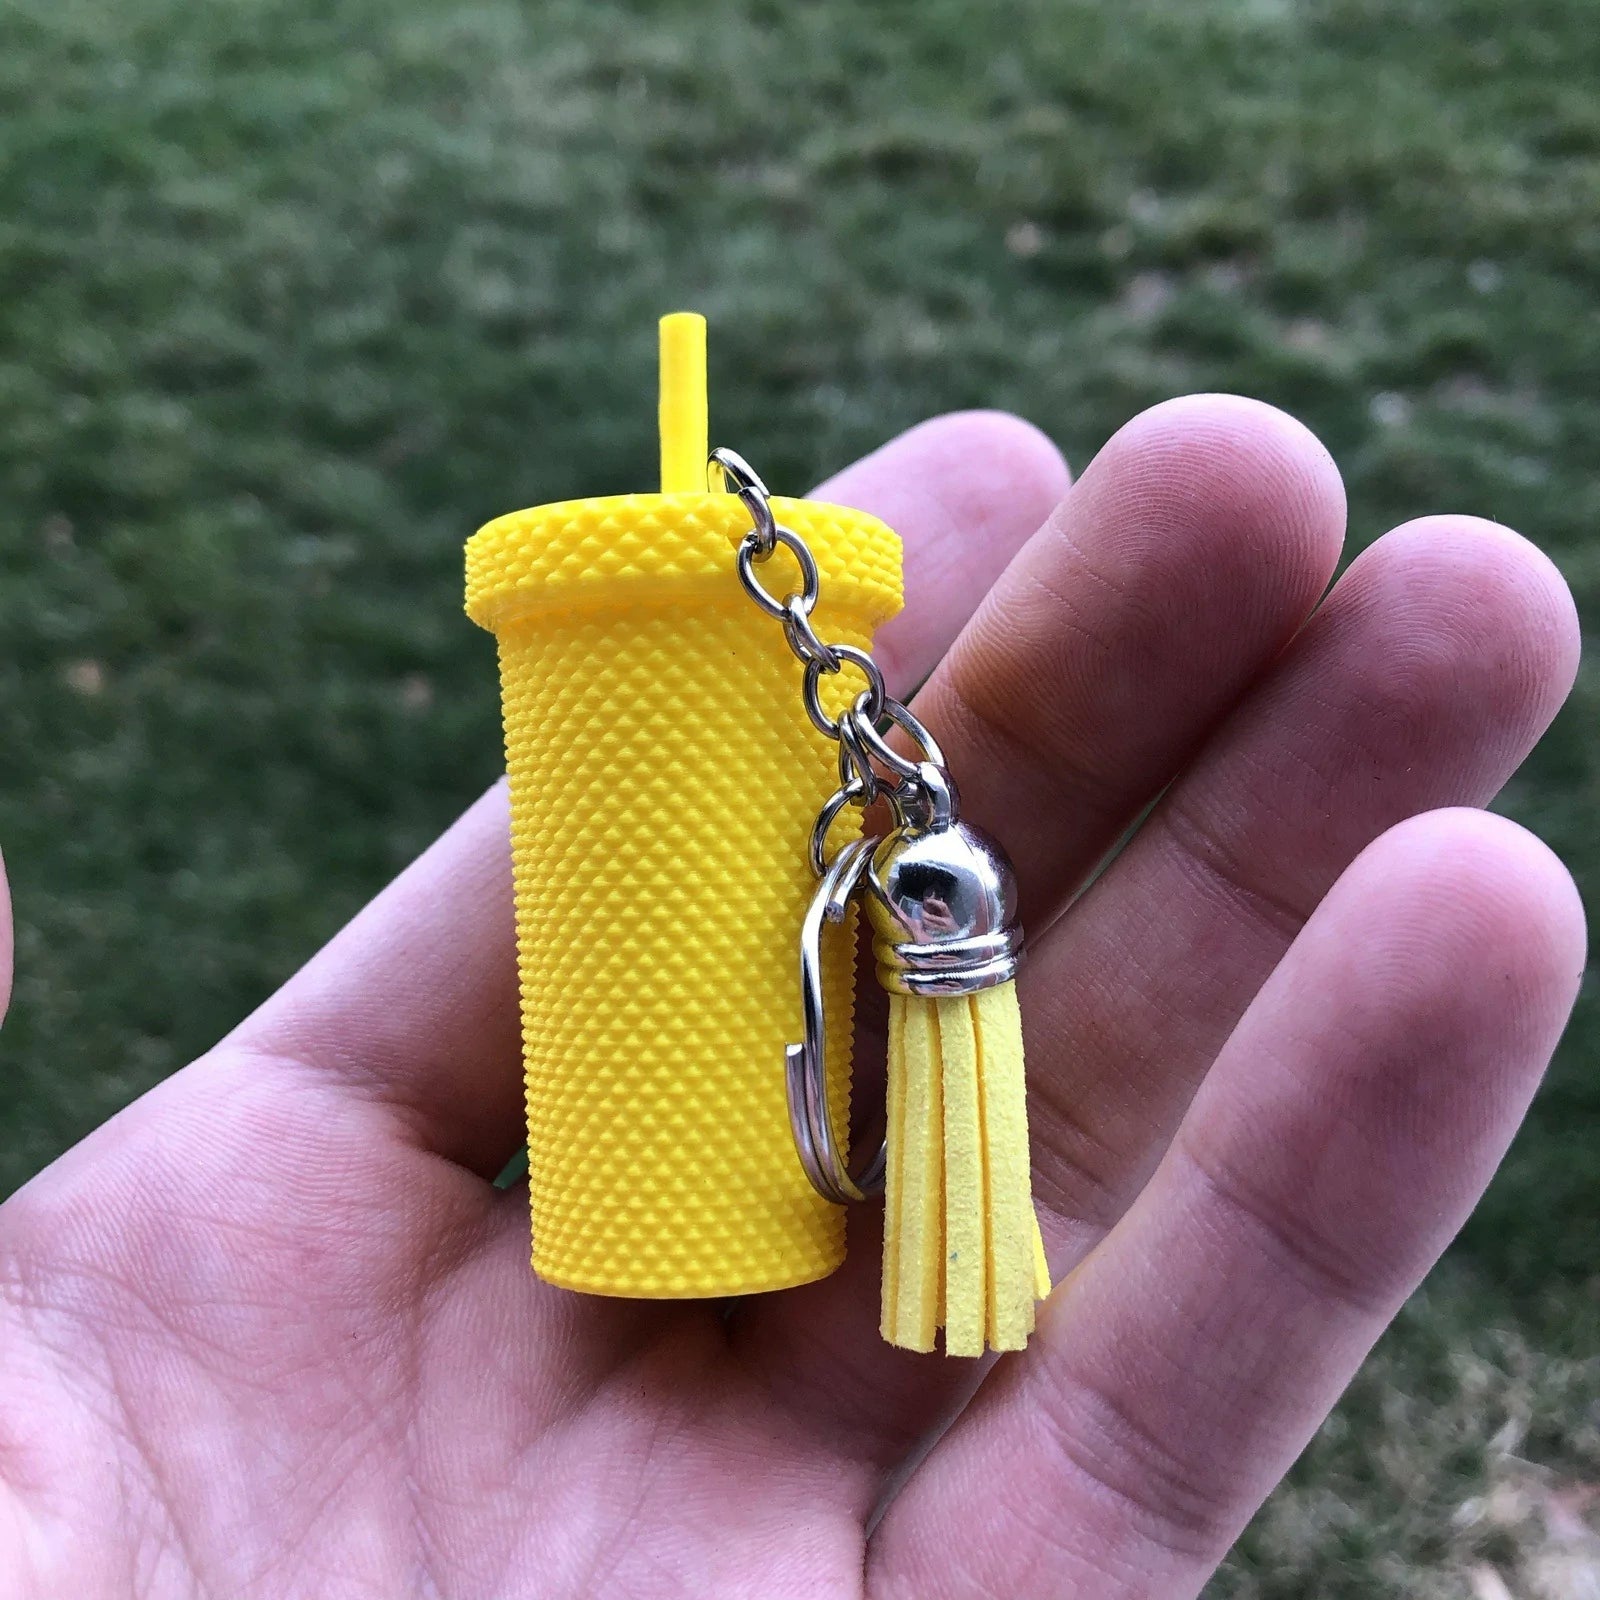 3D Printed Iced Coffee Studded Tumbler Keychain with Charm